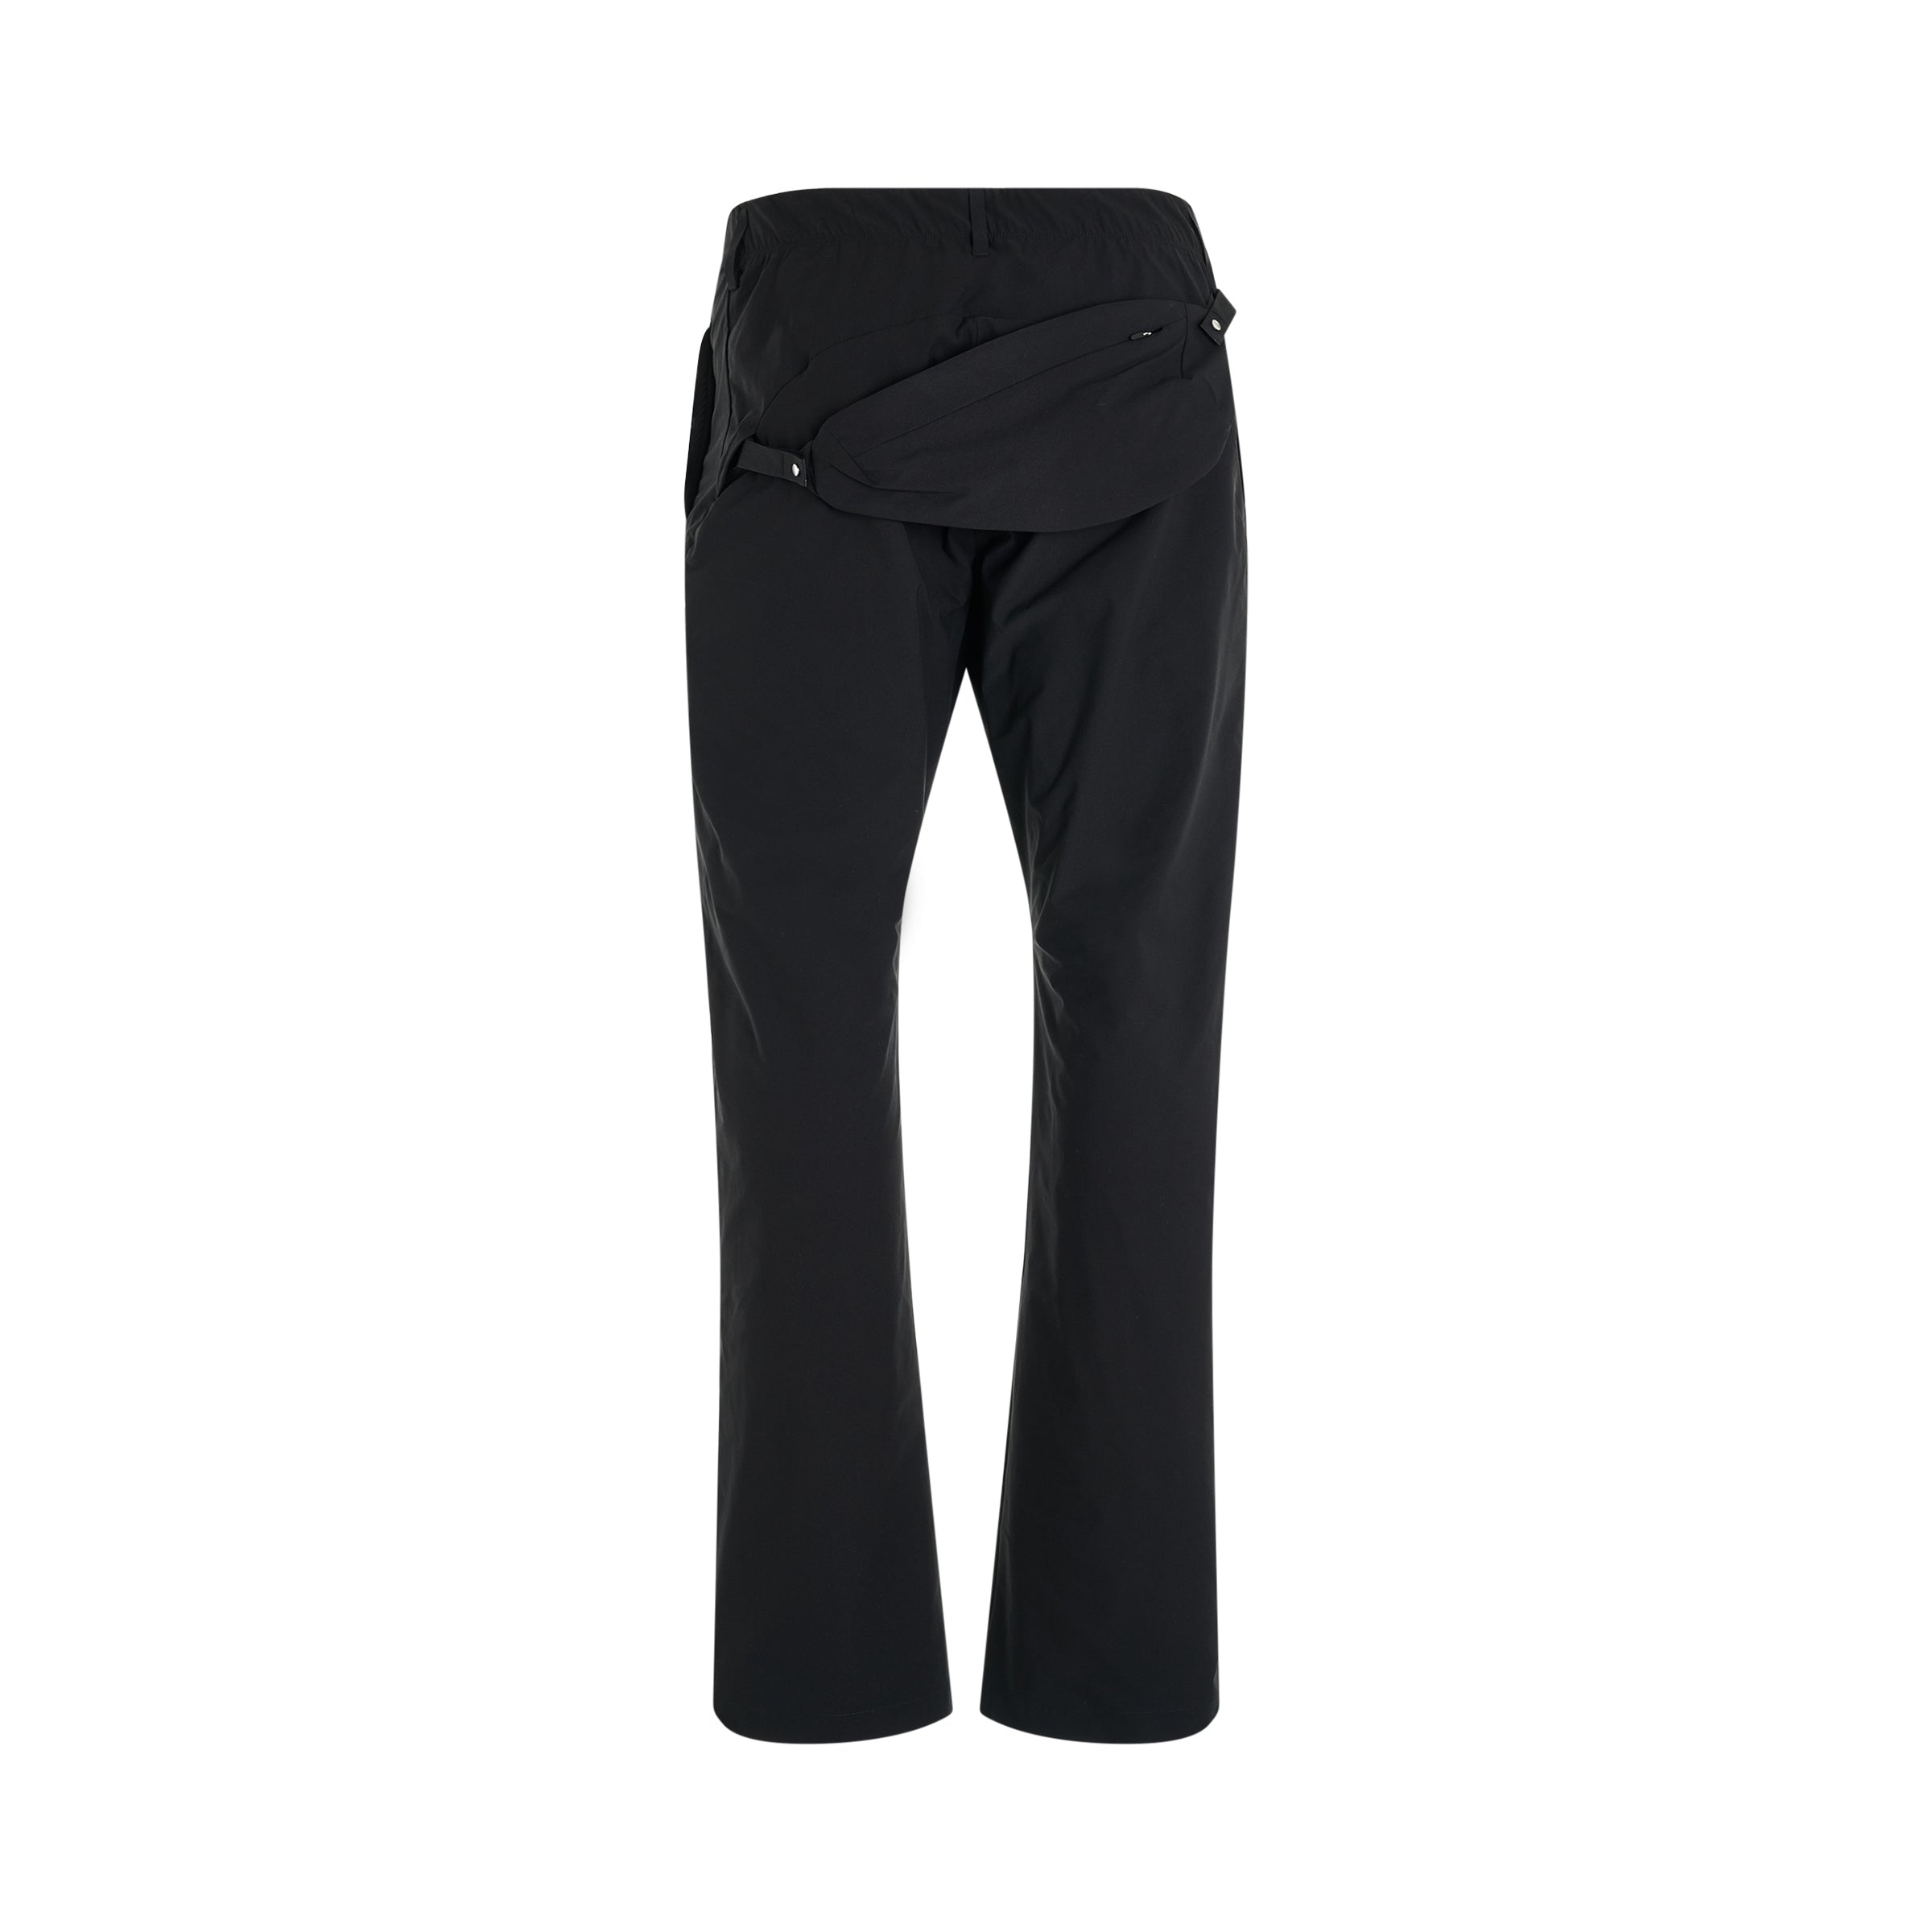 6.0 Technical Pants (Right) in Black - 4